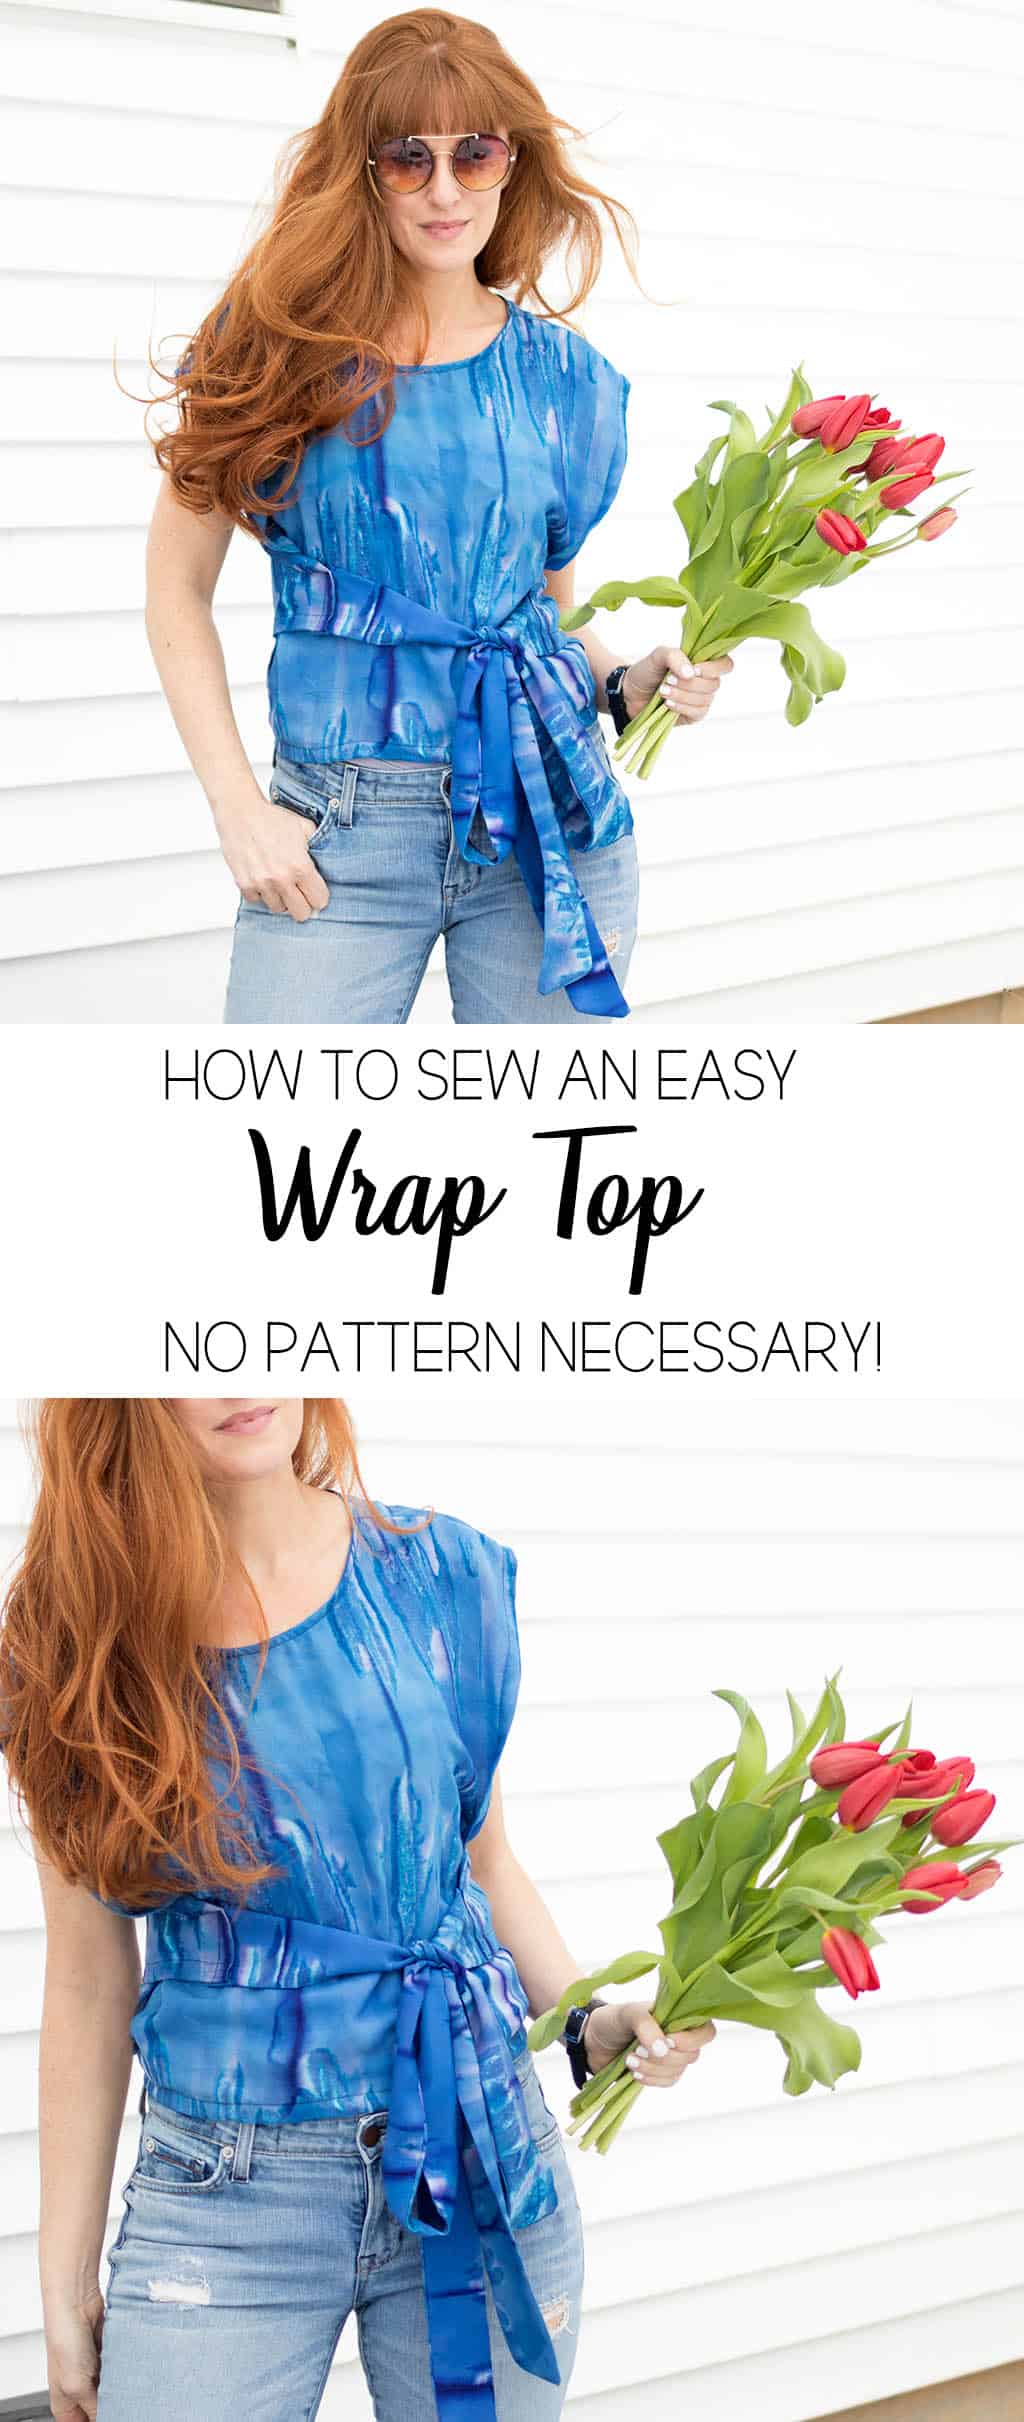 How to sew a wrap top